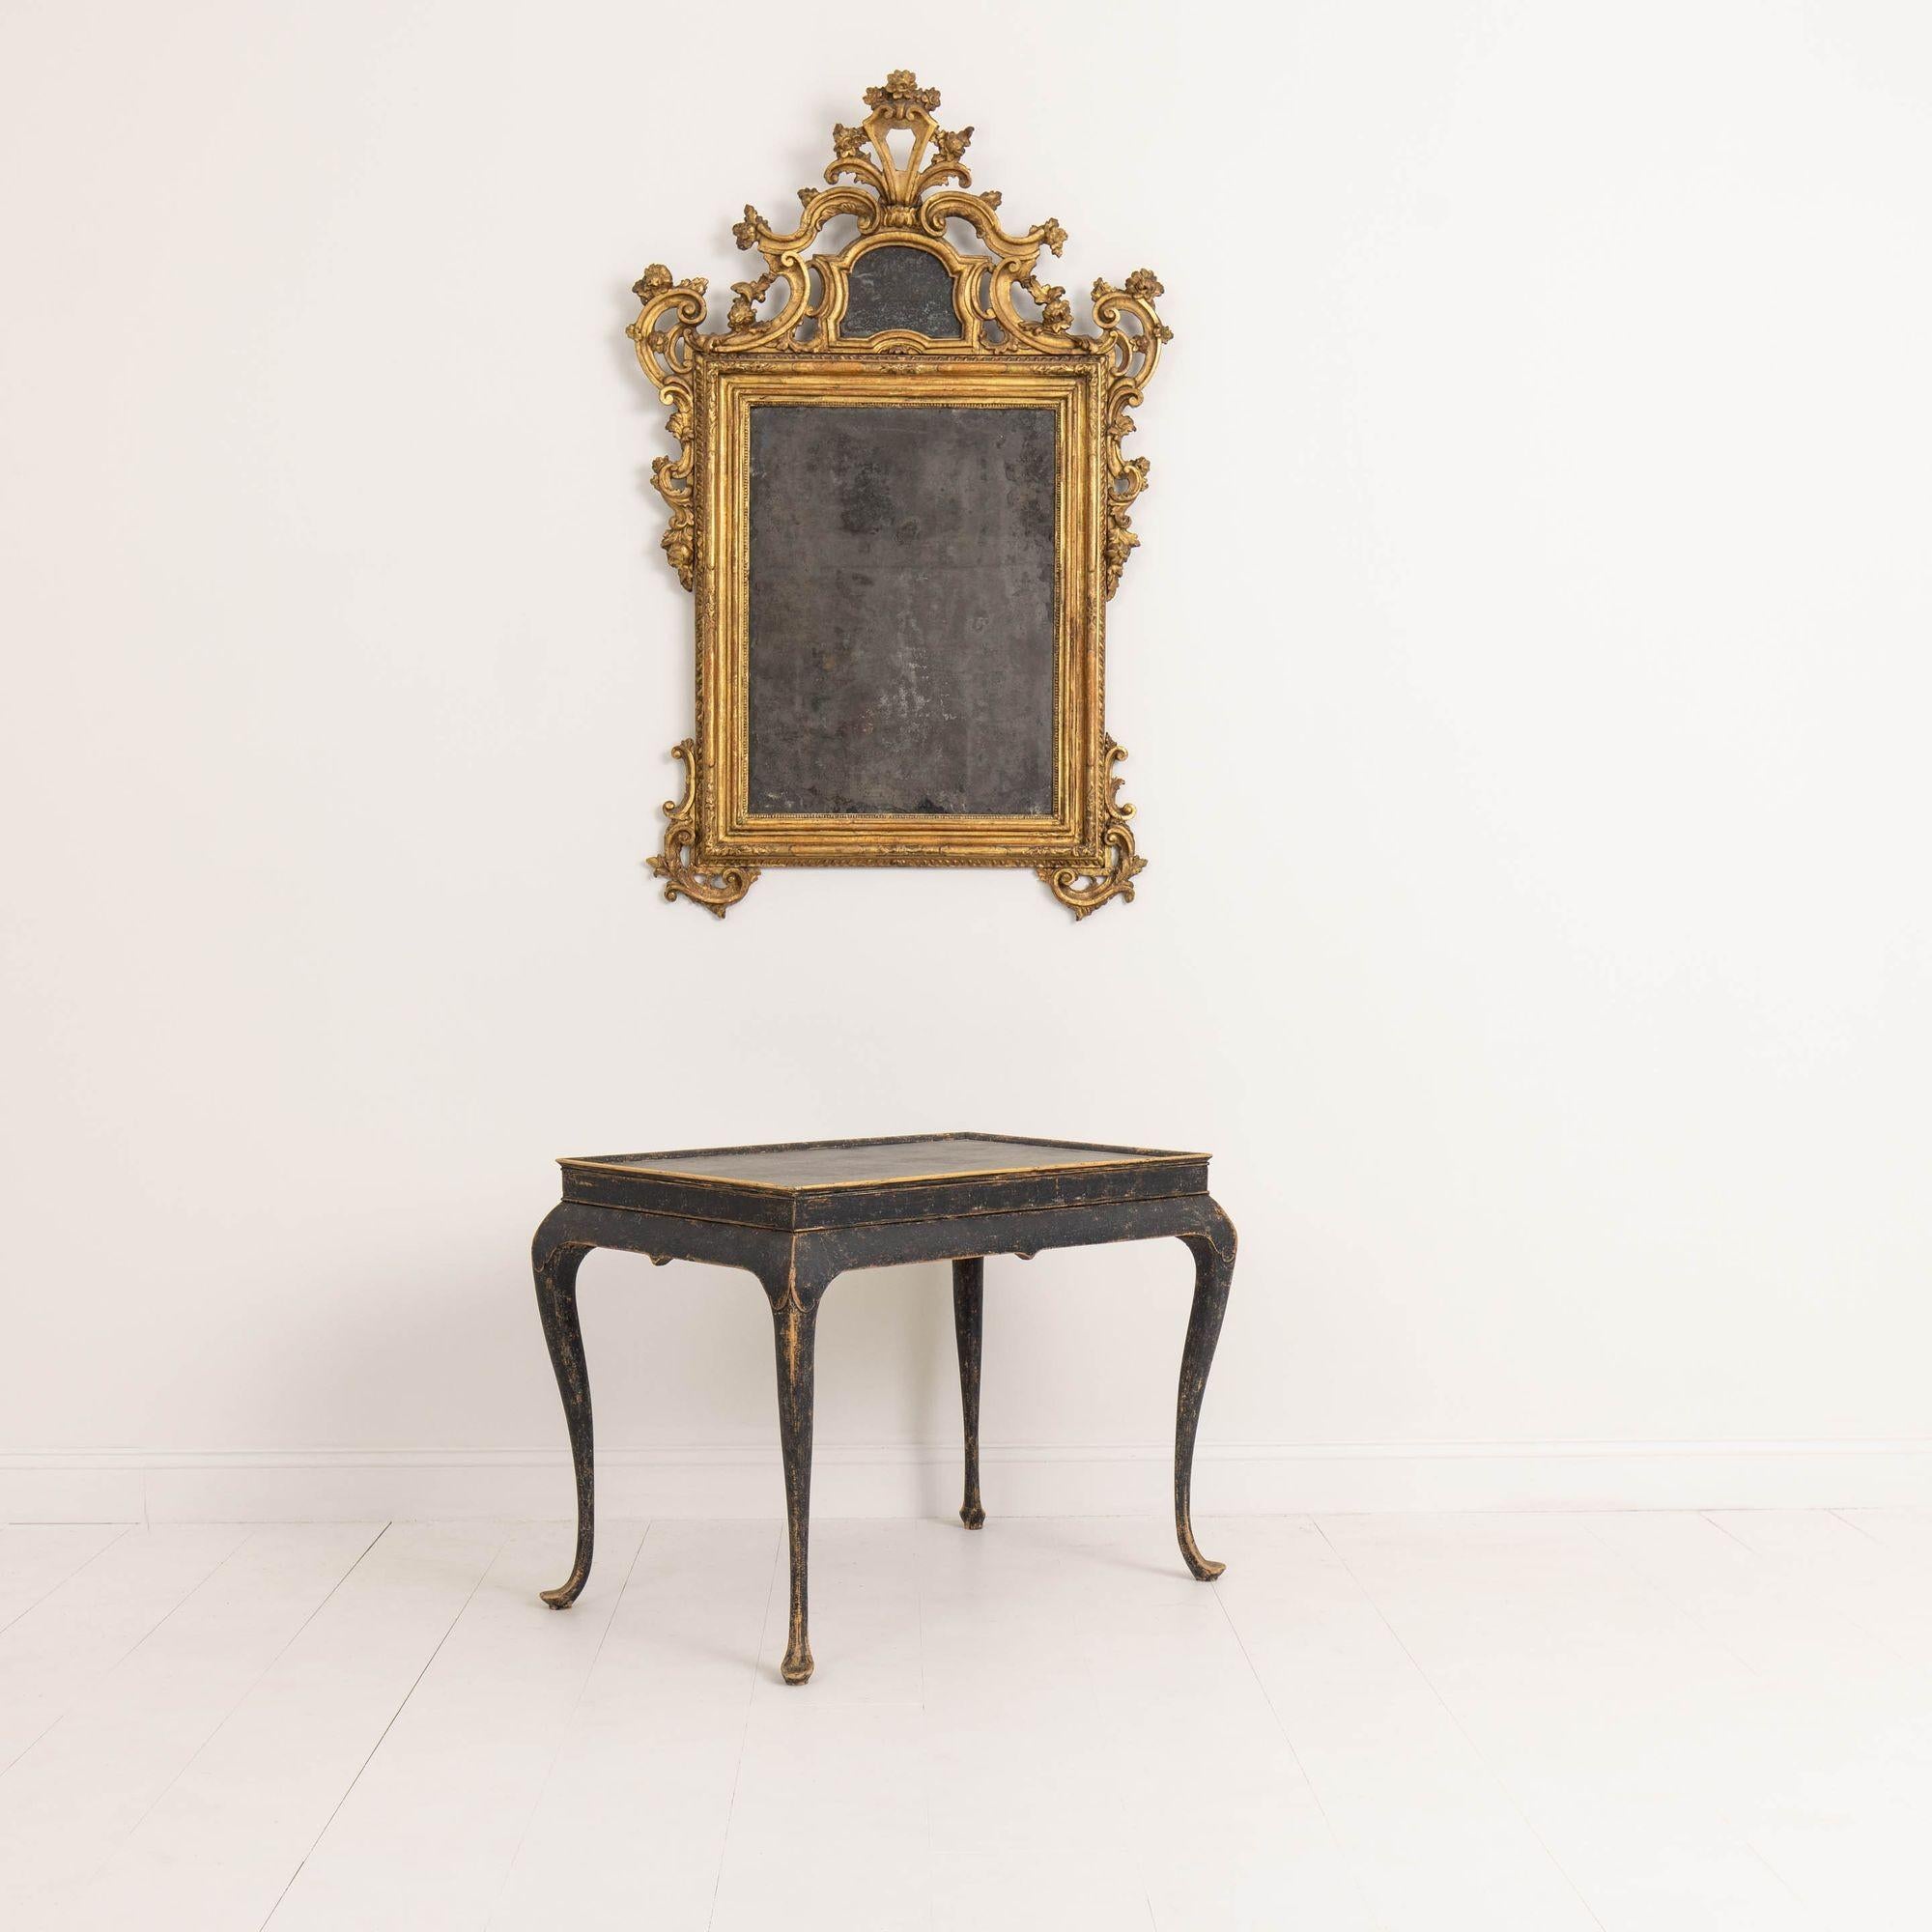 An 18th c. Swedish tea table from the Rococo period, circa 1760. Beautiful, aged black paint with traces of natural wood showing through in areas. Tray top with decorative apron and elegant cabriole legs.